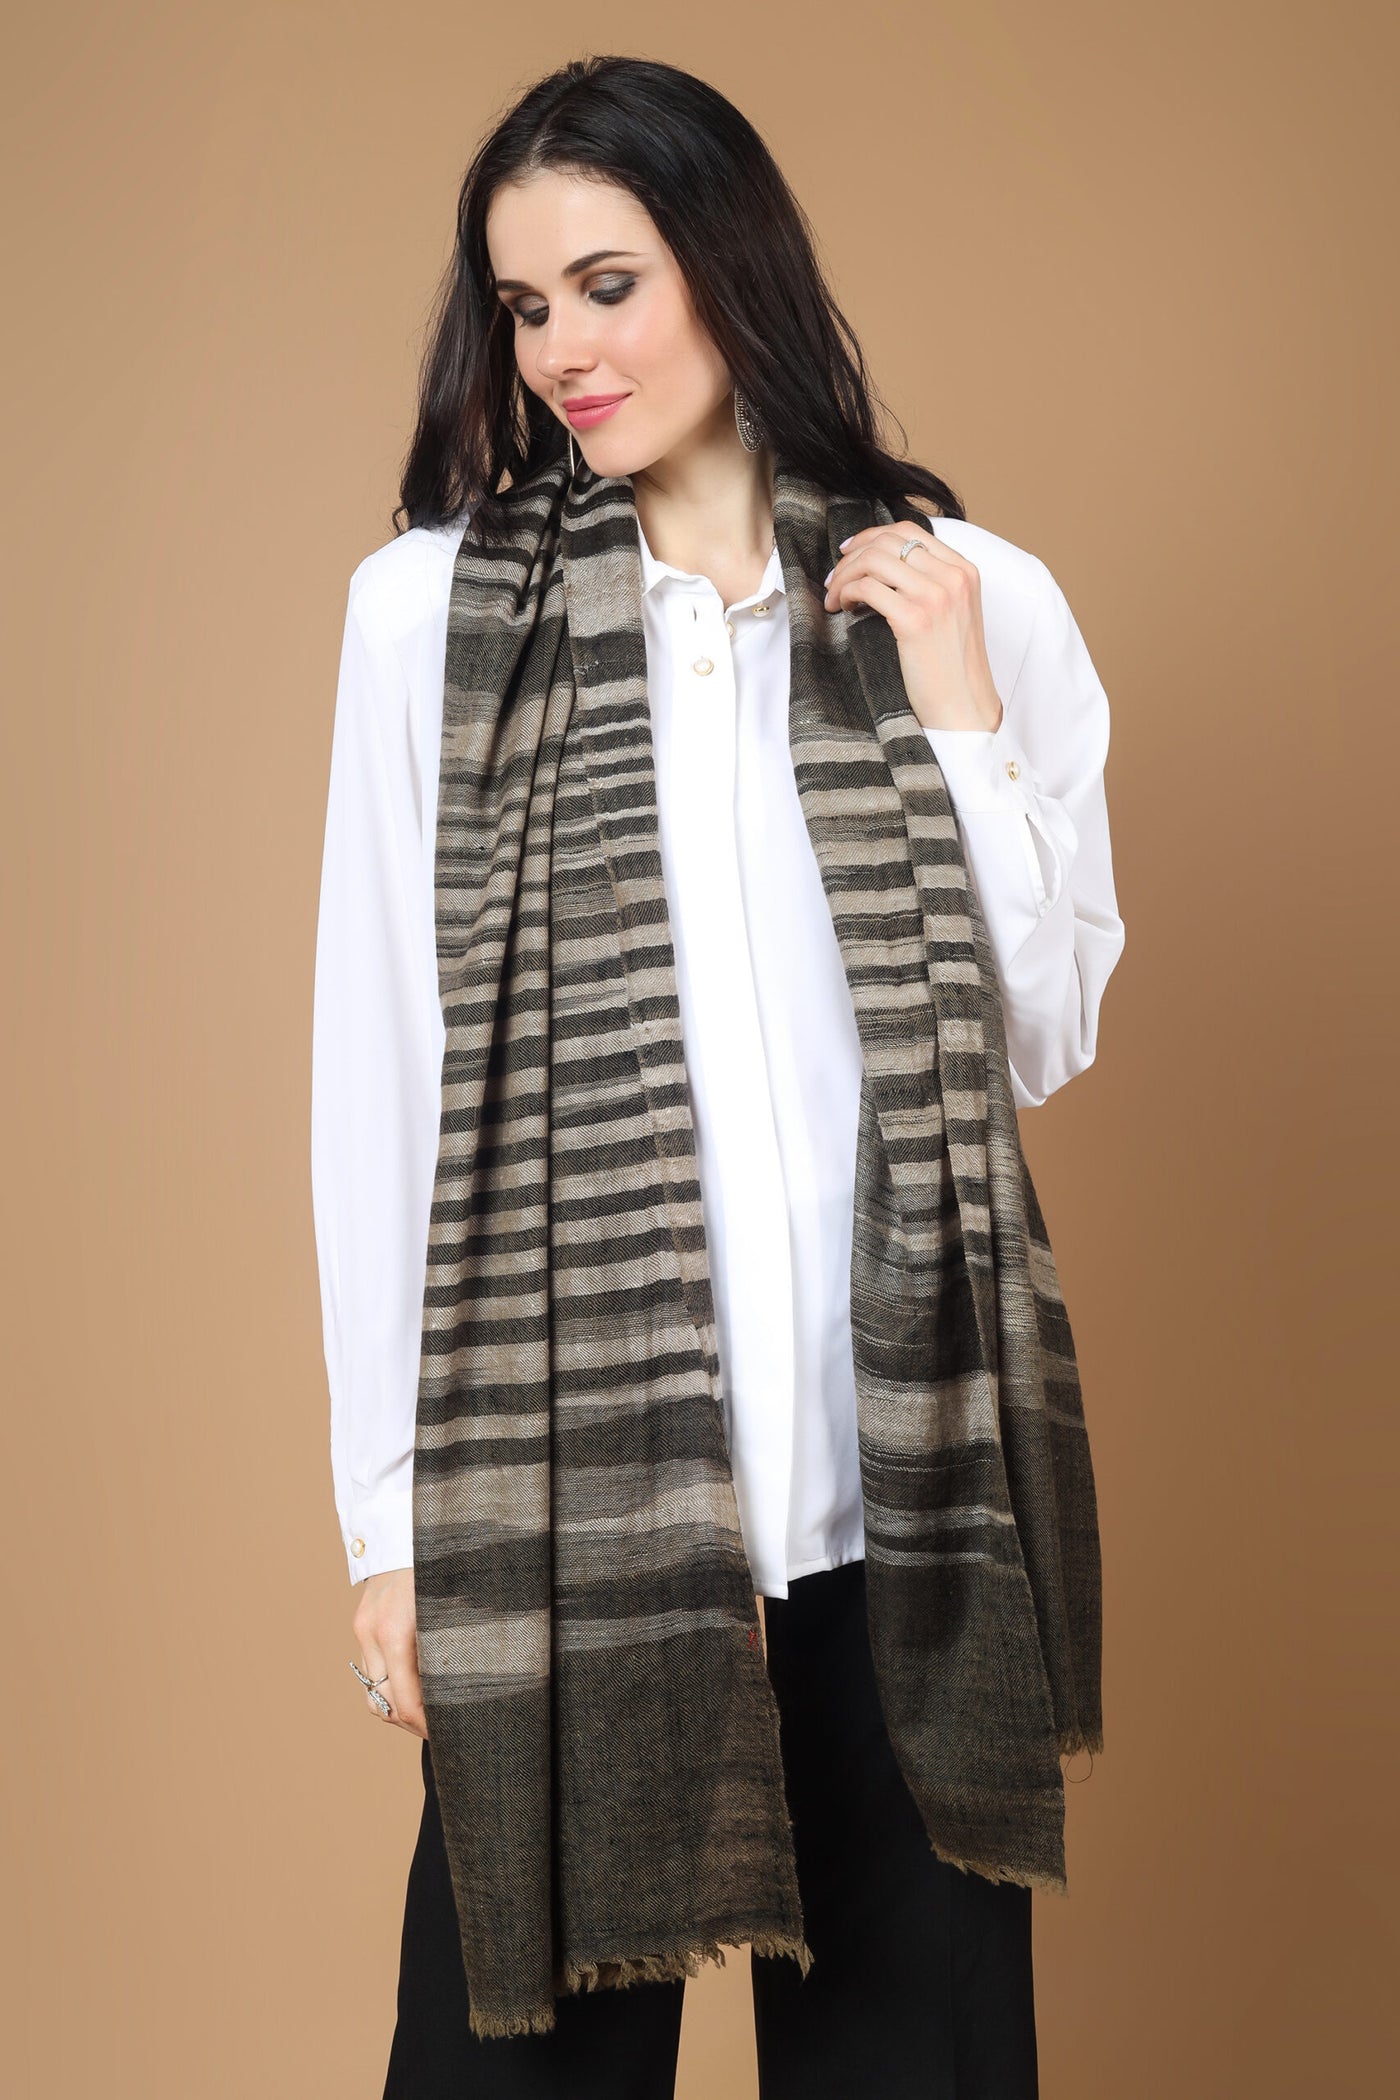 PASHMINA STOLE - luxurious winter item thanks to its exquisite ikkat design that adds elegance to any outfit.